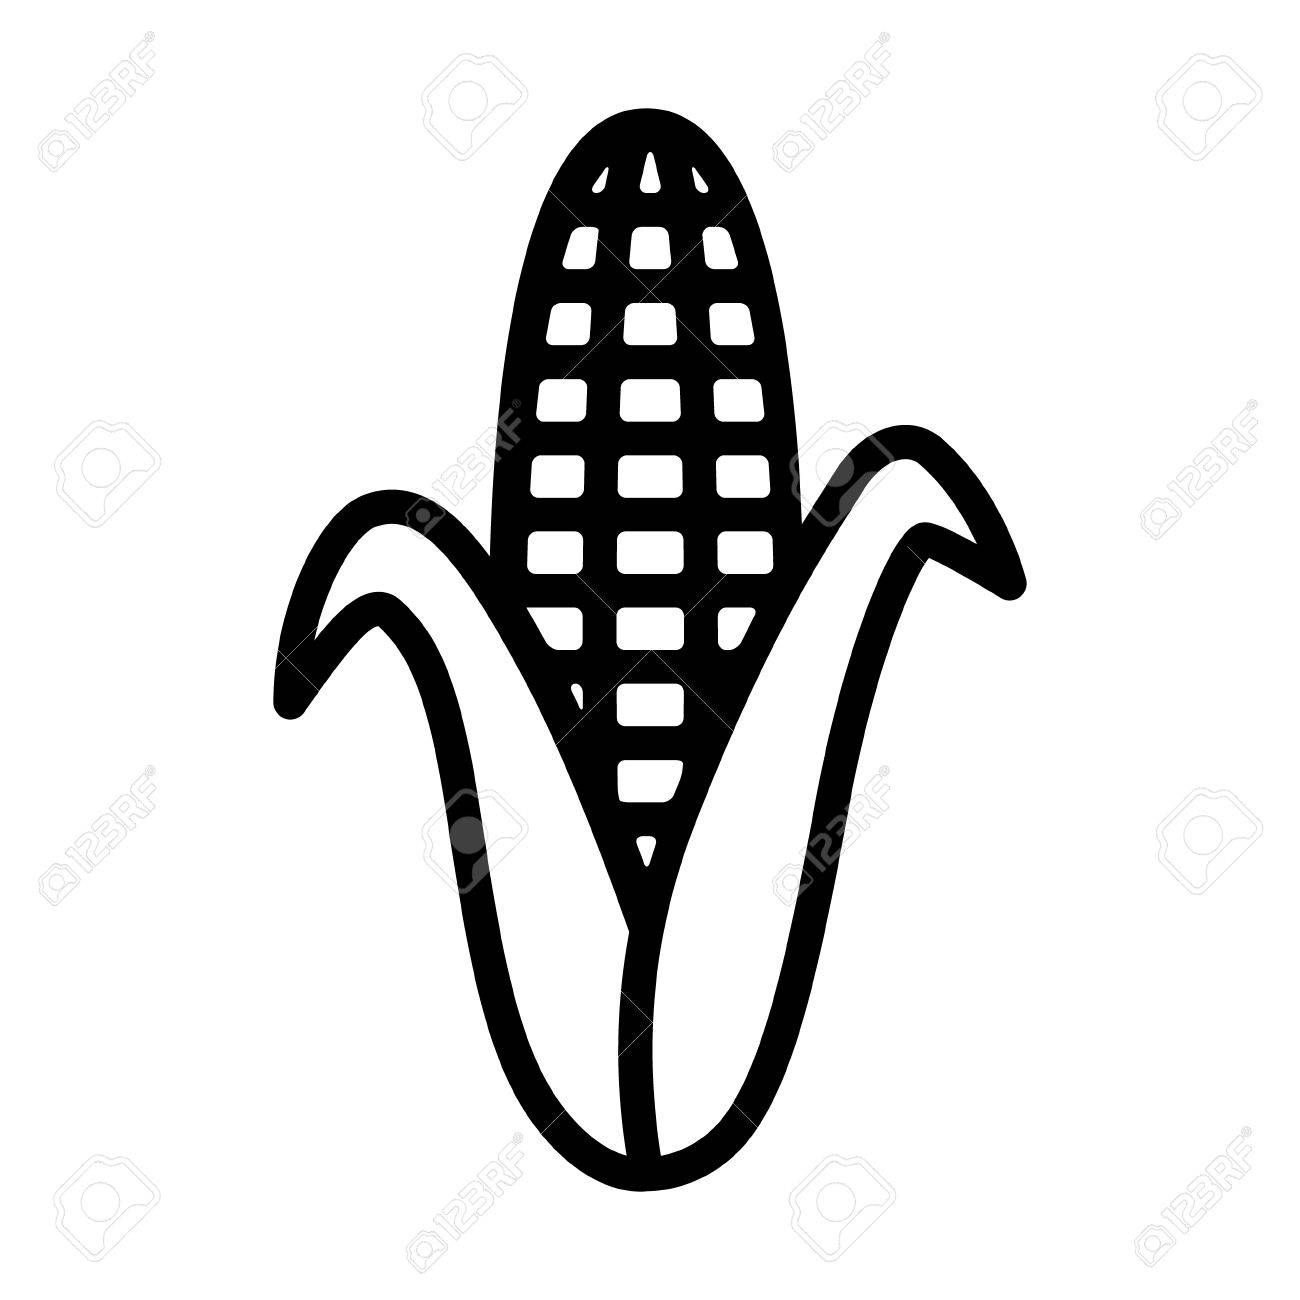 Ear of corn maize line art icon for food apps and websites.